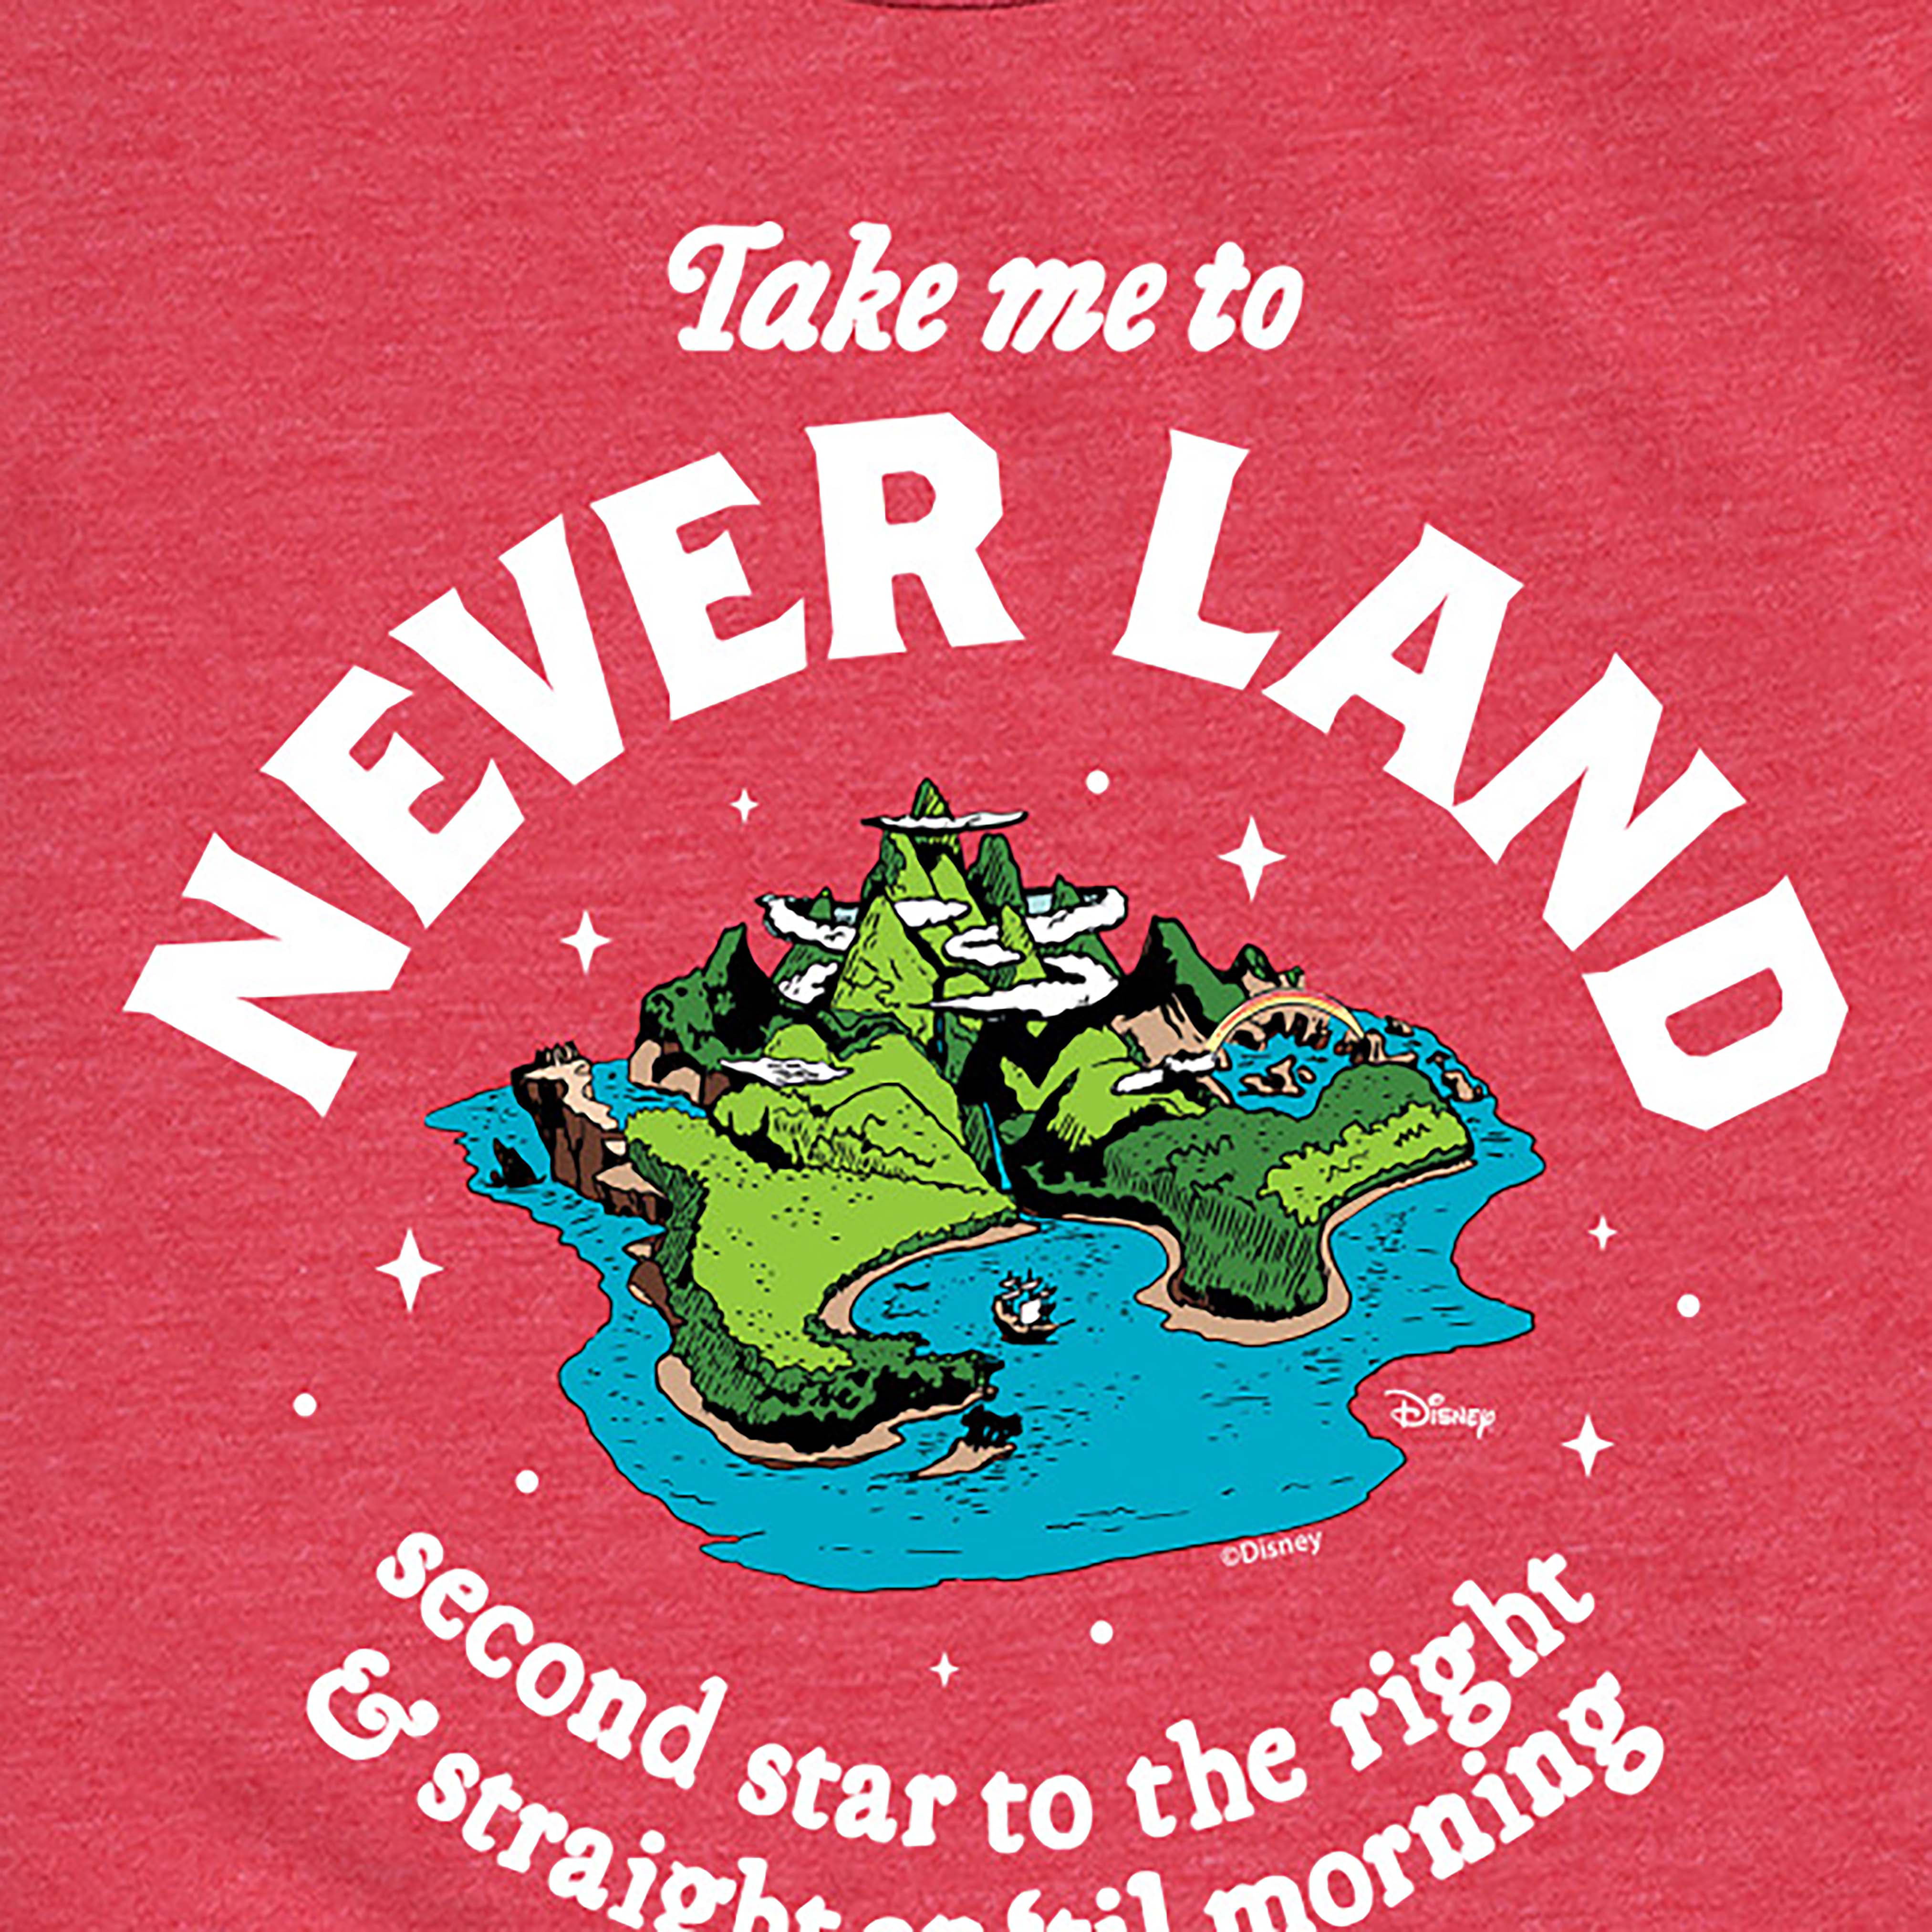 Graphic Sleeve Second - to Pan Disney - Take Star Me Toddler Youth the Right Short T-Shirt And - Neverland - Peter to